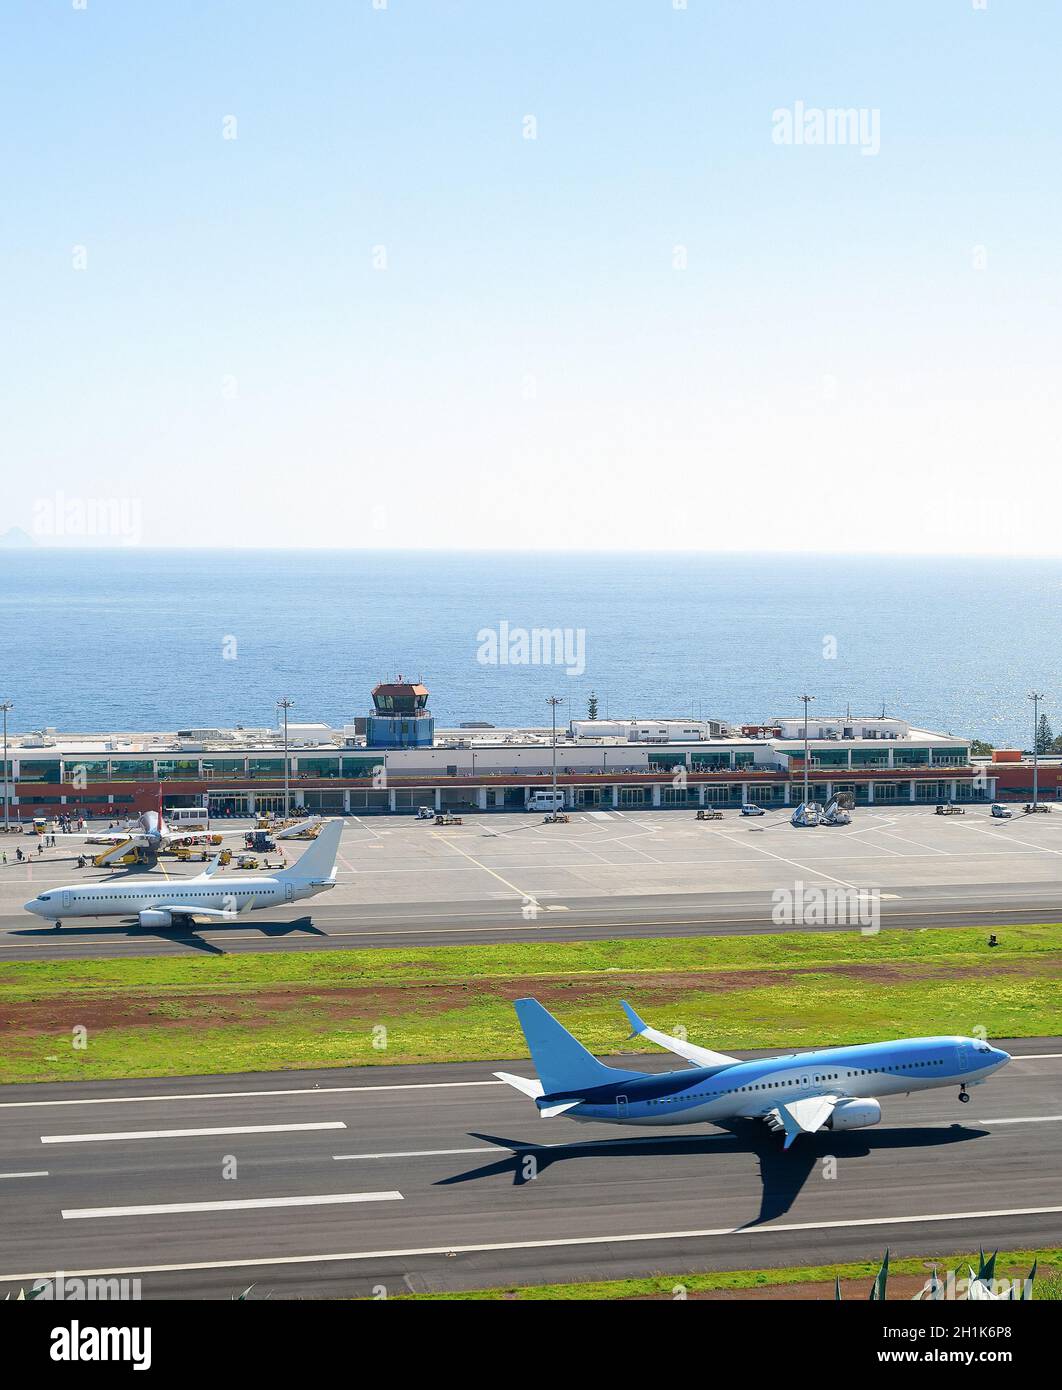 Aerial view of airplaine taking off runway at Madeira international airport, terminal building  in the background, Portugal Stock Photo